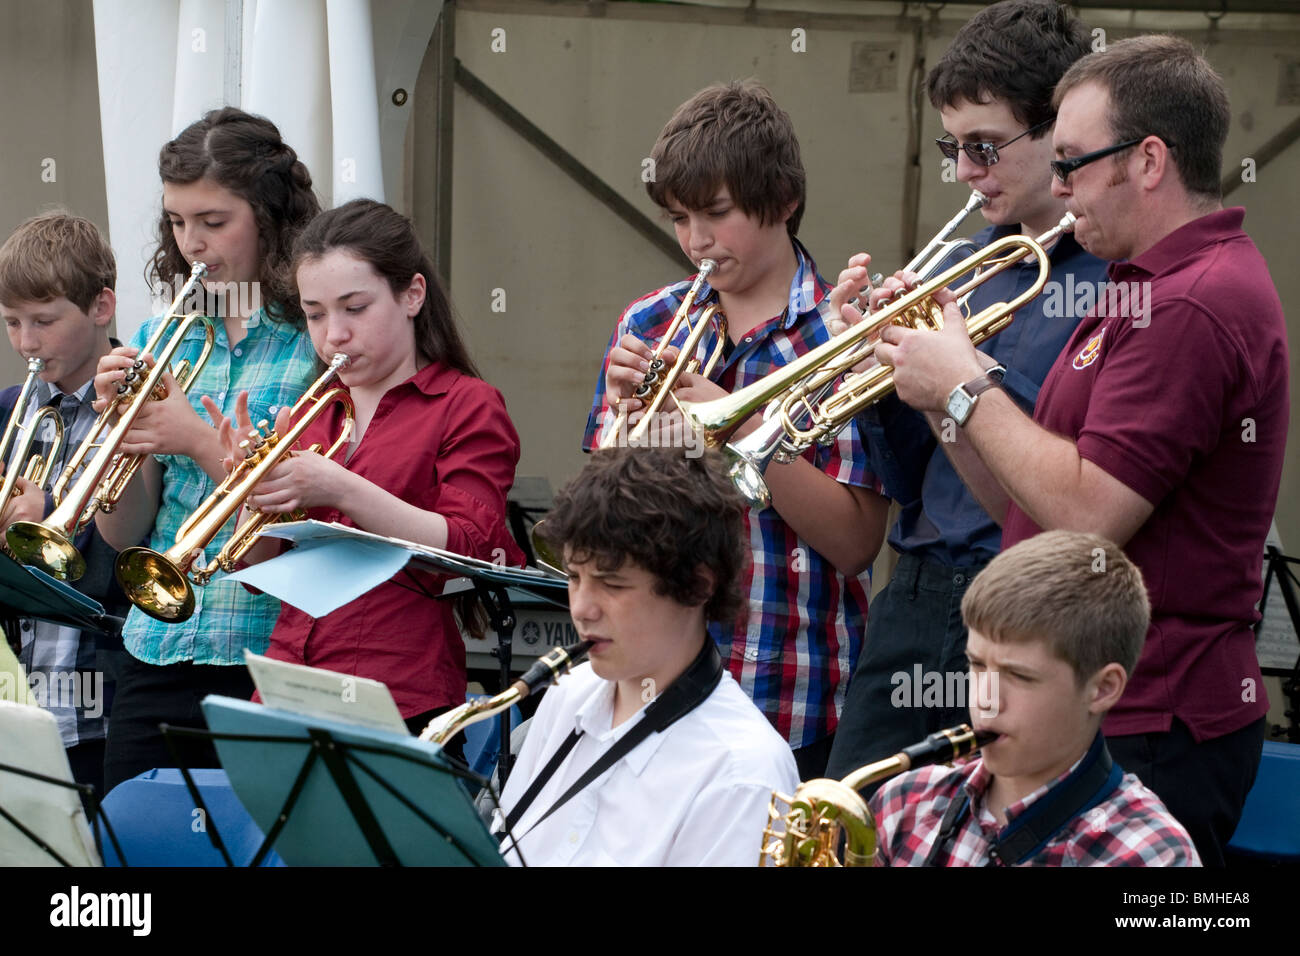 A mixture of school children and teachers performing at a fair Stock Photo